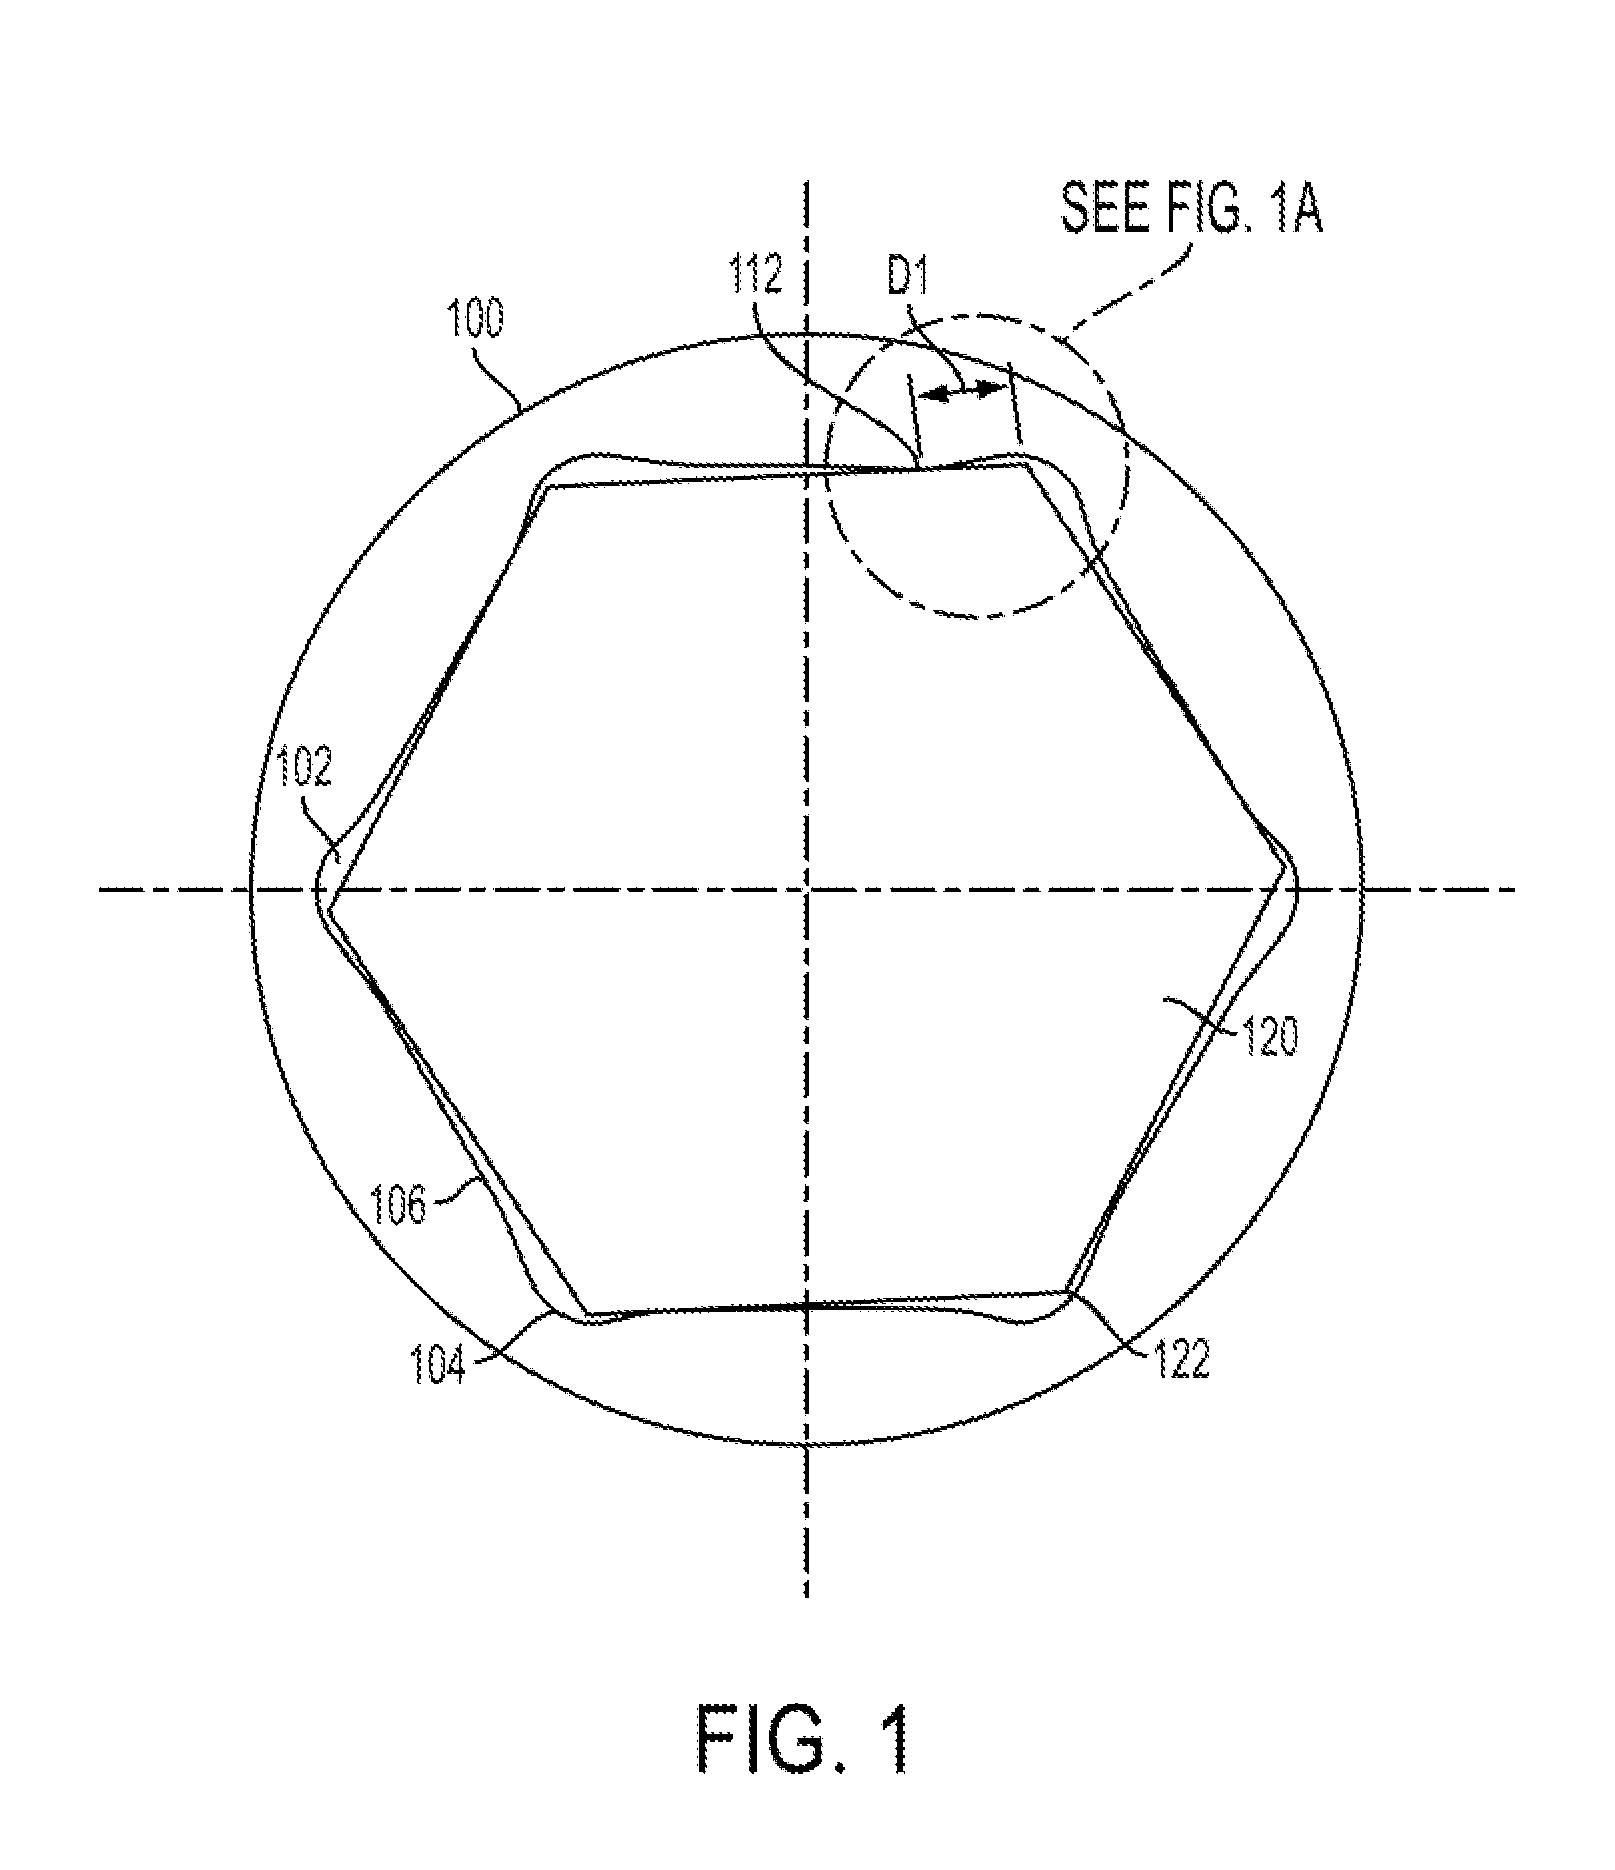 Snap On patent filing drawing 6-point socket